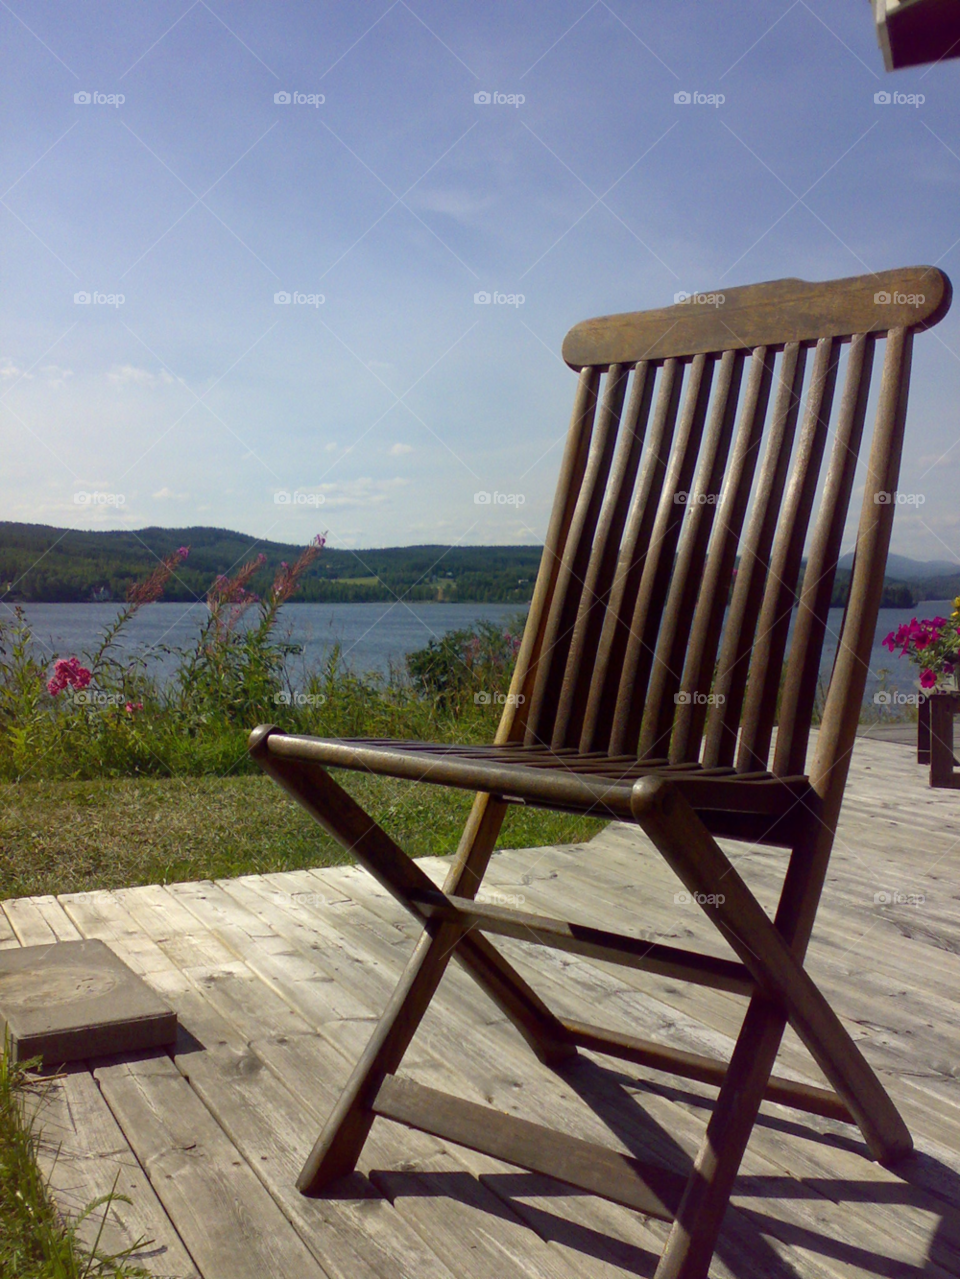 nature outdoor chair summer by AnnOstby